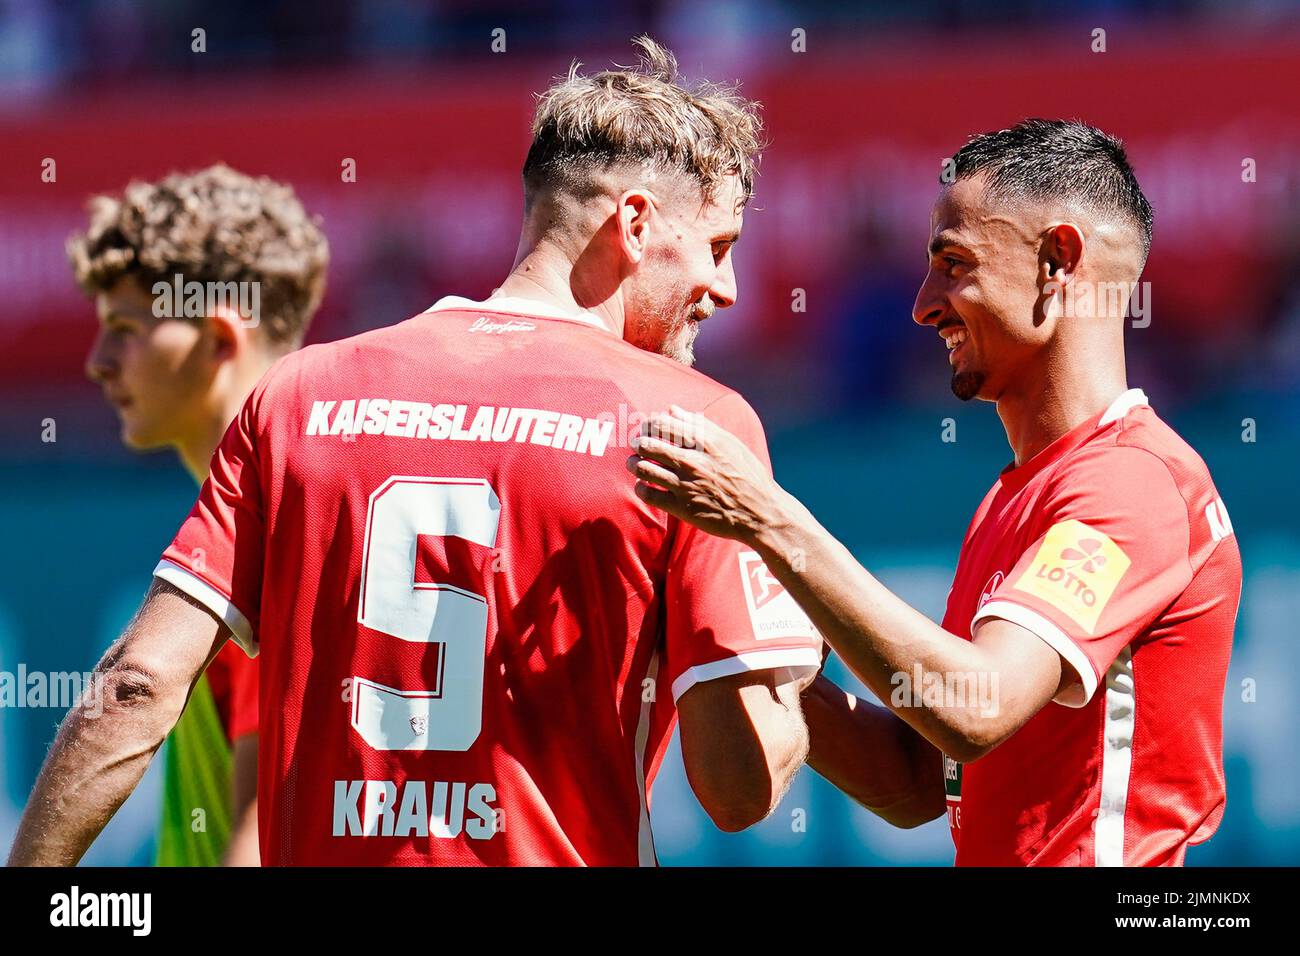 07 August 2022, Rhineland-Palatinate, Kaiserslautern: Soccer: 2nd Bundesliga, 1. FC Kaiserslautern - FC St. Pauli, Matchday 3, Fritz-Walter-Stadion. Kaiserslautern's goal scorer Kenny Prince Redondo (r) celebrates the victory with Kaiserslautern's Kevin Kraus. Photo: Uwe Anspach/dpa - IMPORTANT NOTE: In accordance with the requirements of the DFL Deutsche Fußball Liga and the DFB Deutscher Fußball-Bund, it is prohibited to use or have used photographs taken in the stadium and/or of the match in the form of sequence pictures and/or video-like photo series. Stock Photo